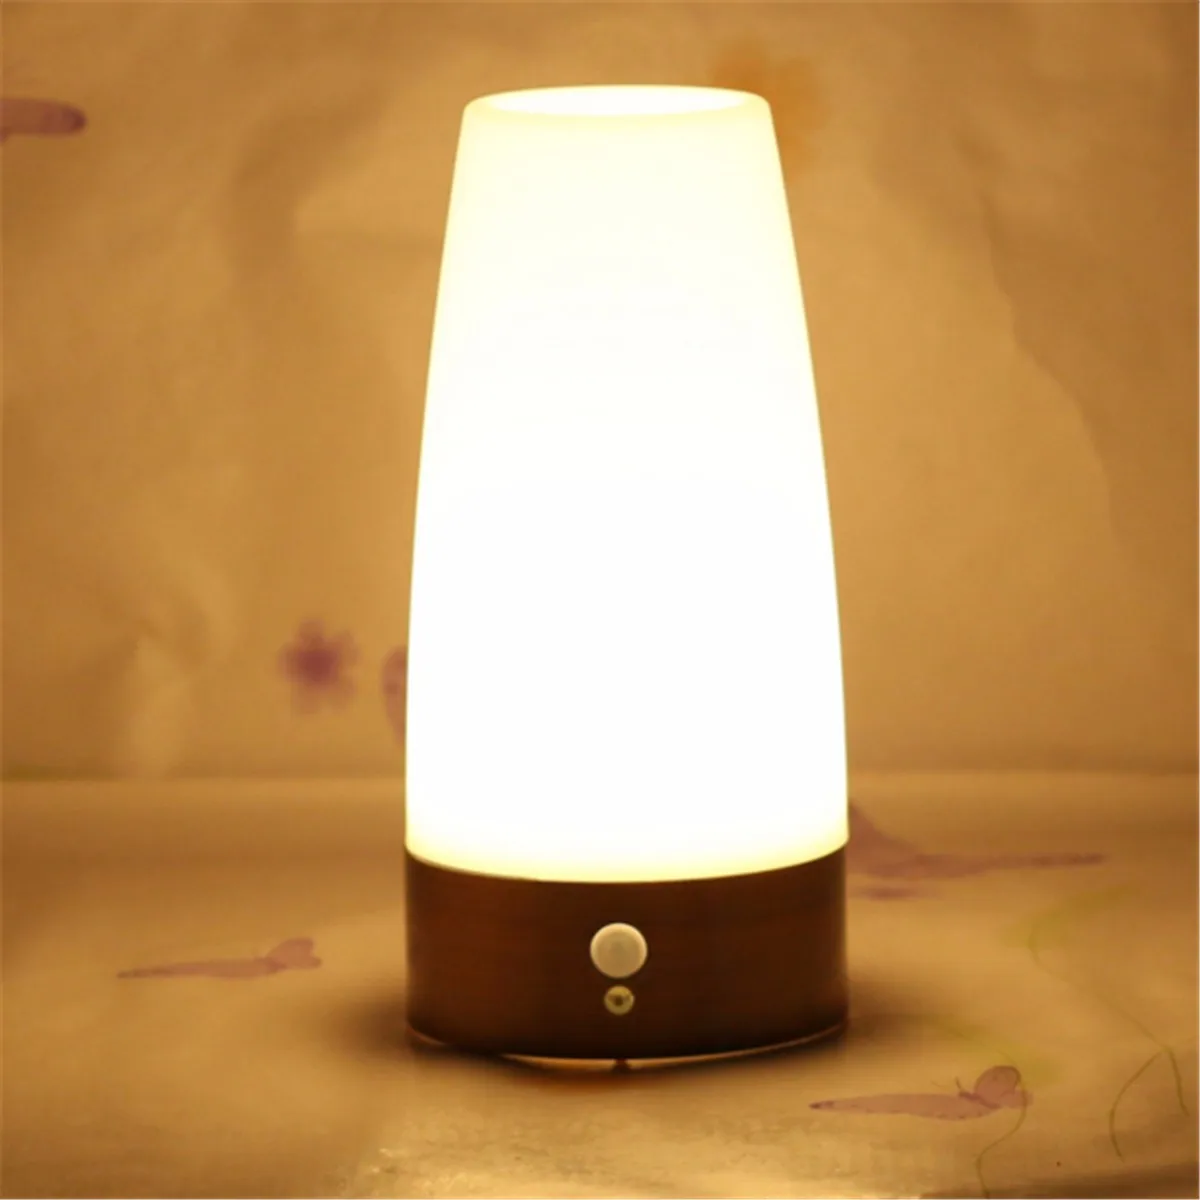 Jiguoor Wireless LED Night Light Table Bed Lamp Motion Sensor Battery Operated For Indoor Lighting